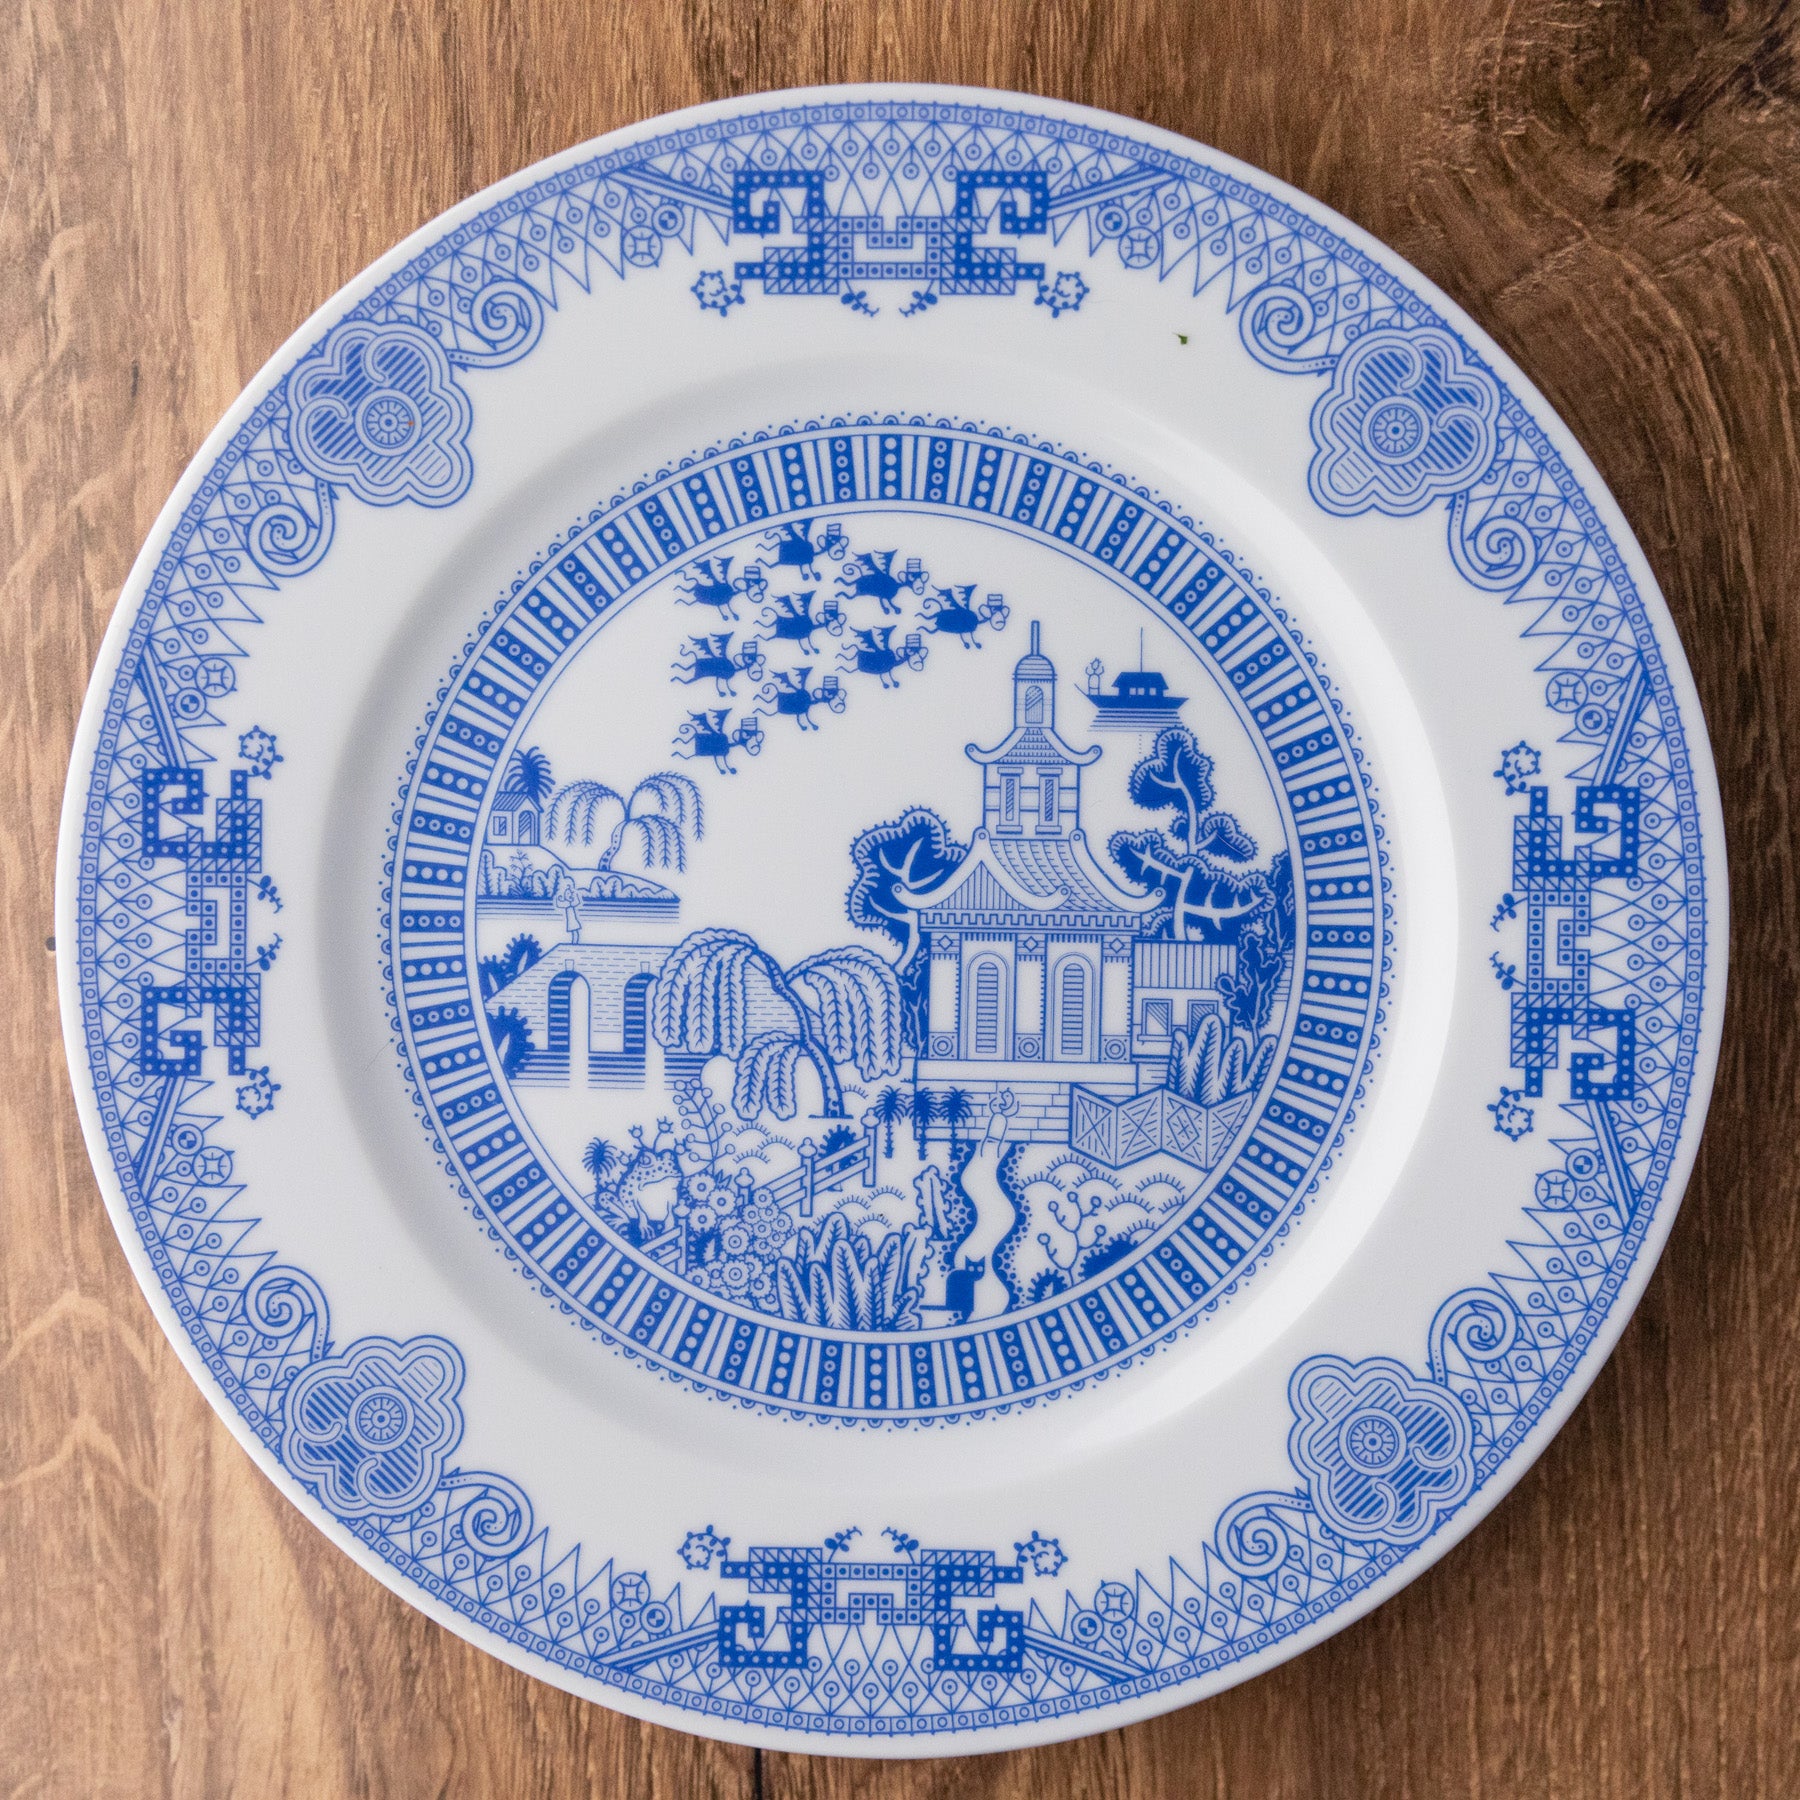 Best Blue Willow Porcelain Chinaware Calamityware Plate 1: Flying Monkeys, 4 Plates